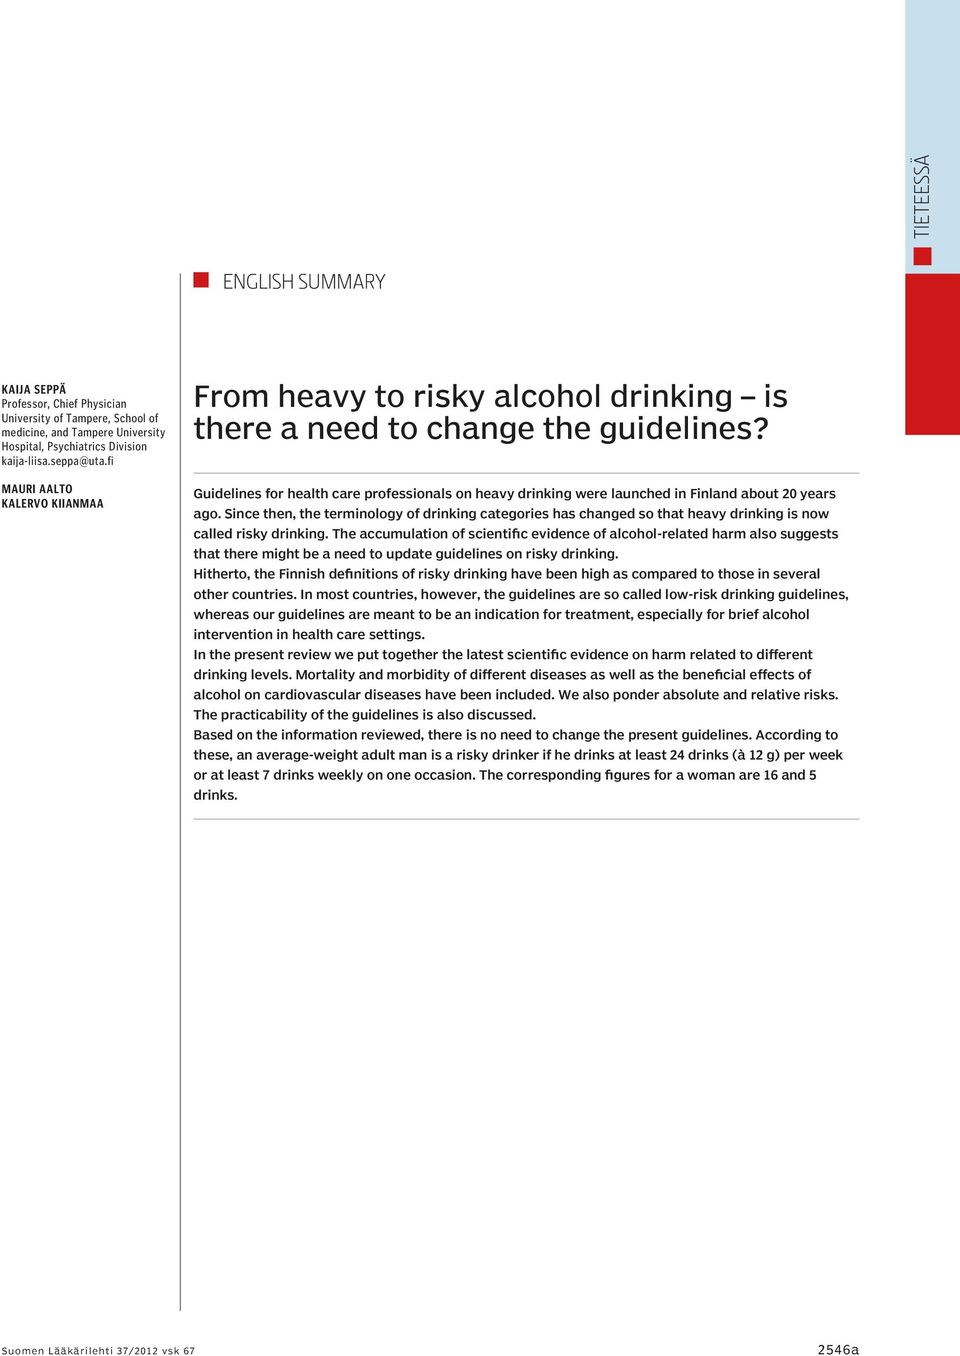 Guidelines for health care professionals on heavy drinking were launched in Finland about 20 years ago.